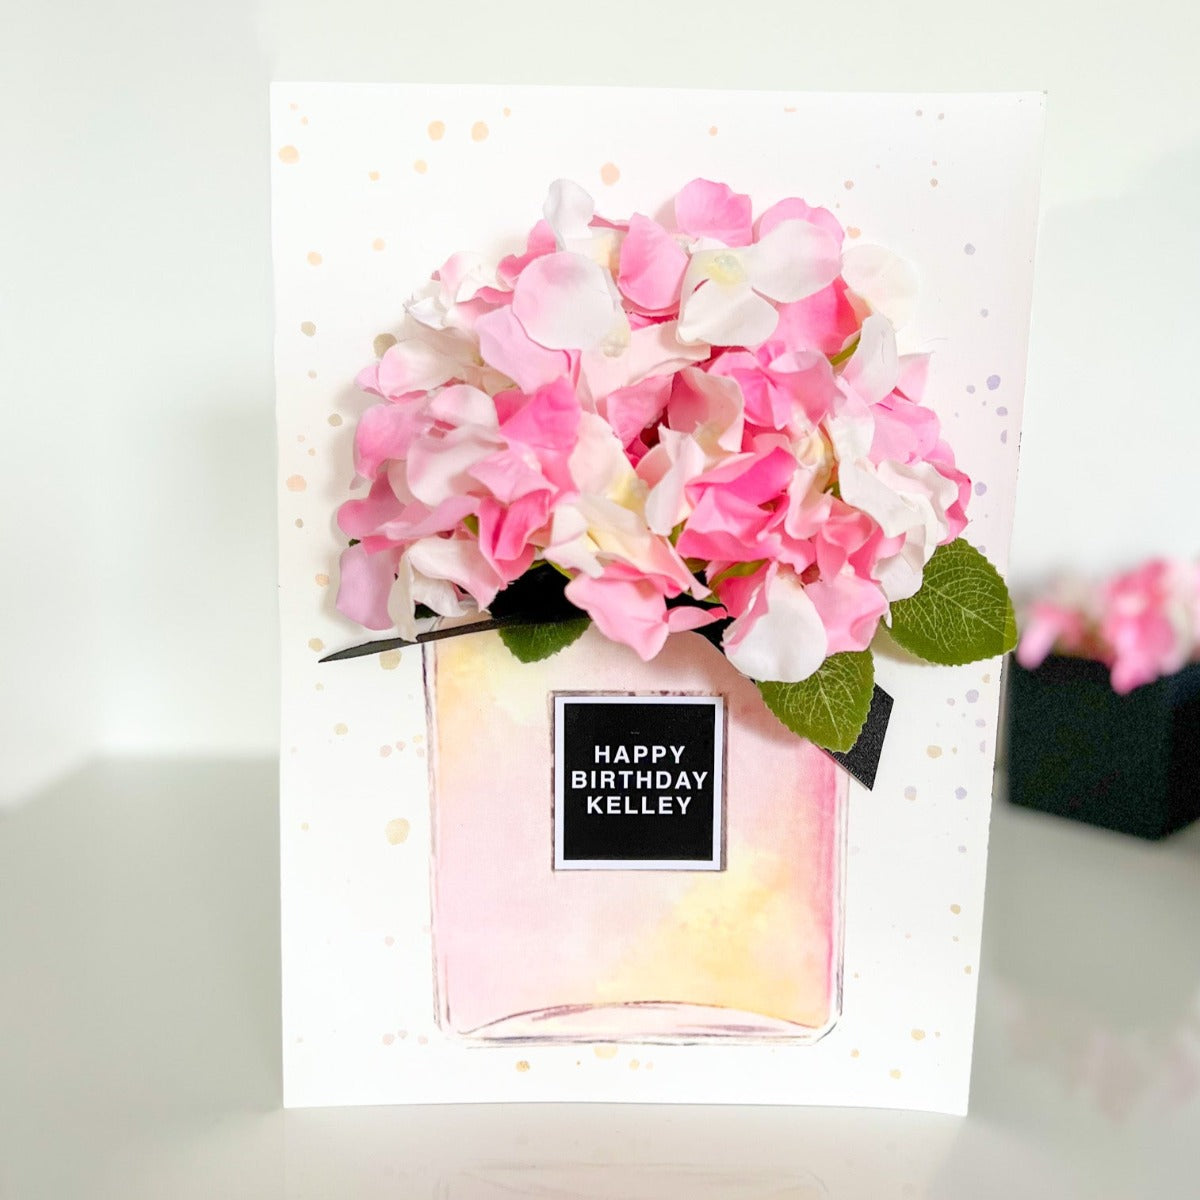 Happy 60th Birthday luxury Wife Card handmade with scented pink flowers | The Luxe Co